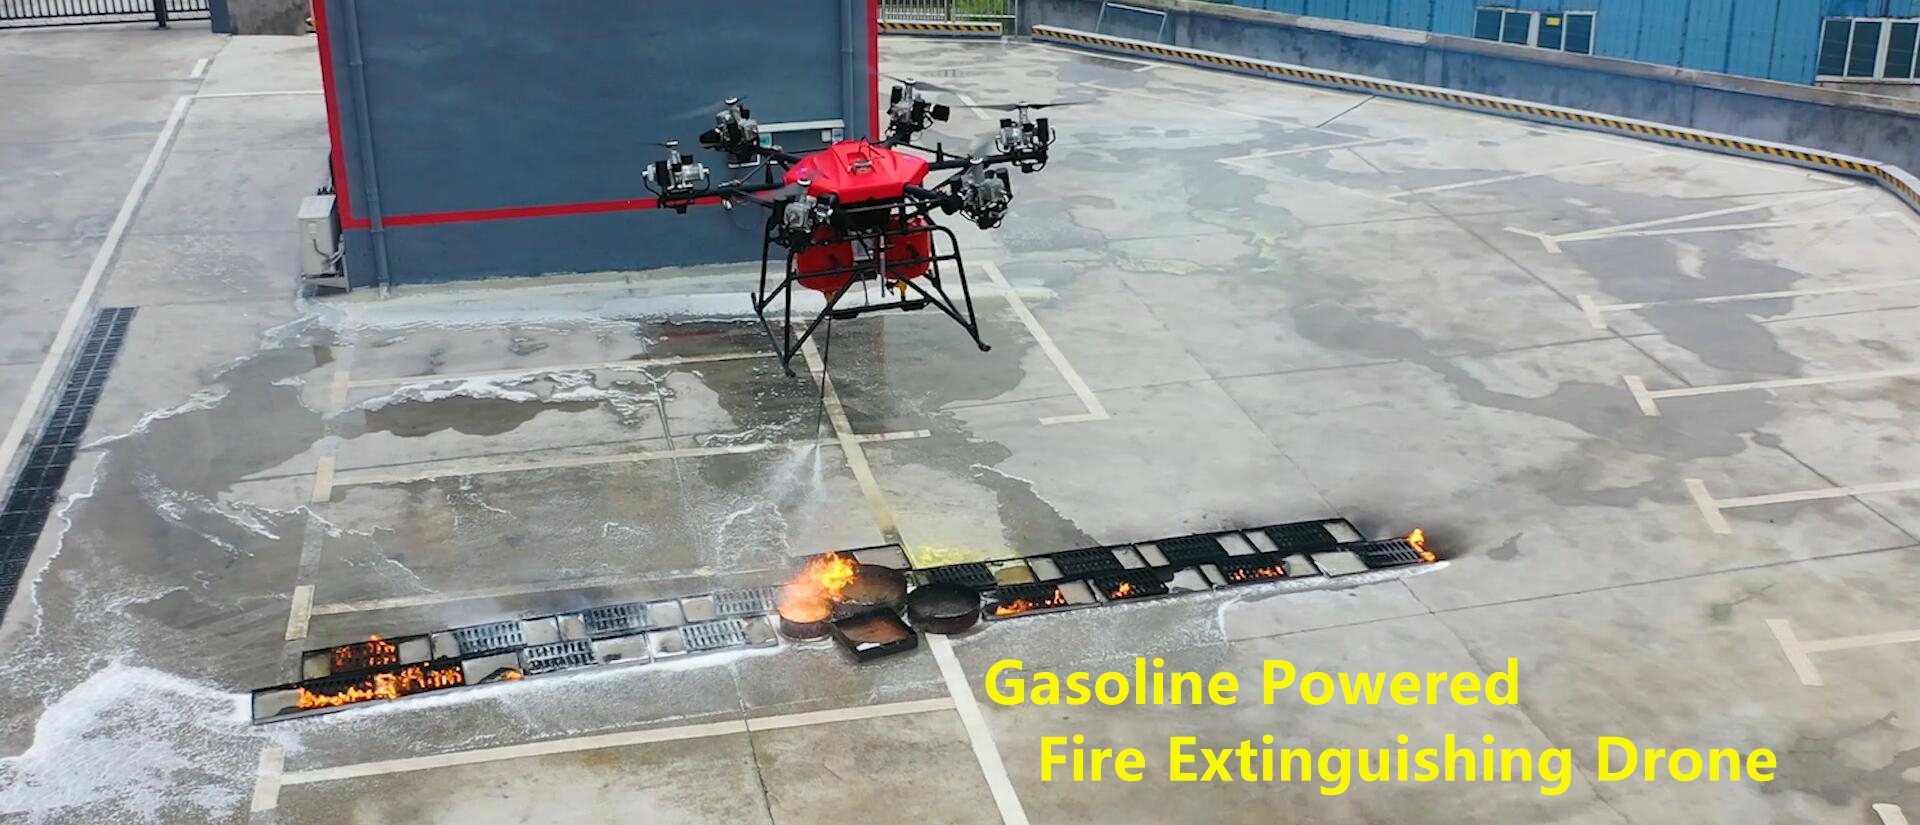 Fire Fighting Emergency Rescue Equipment Dry Powder Jet Drone